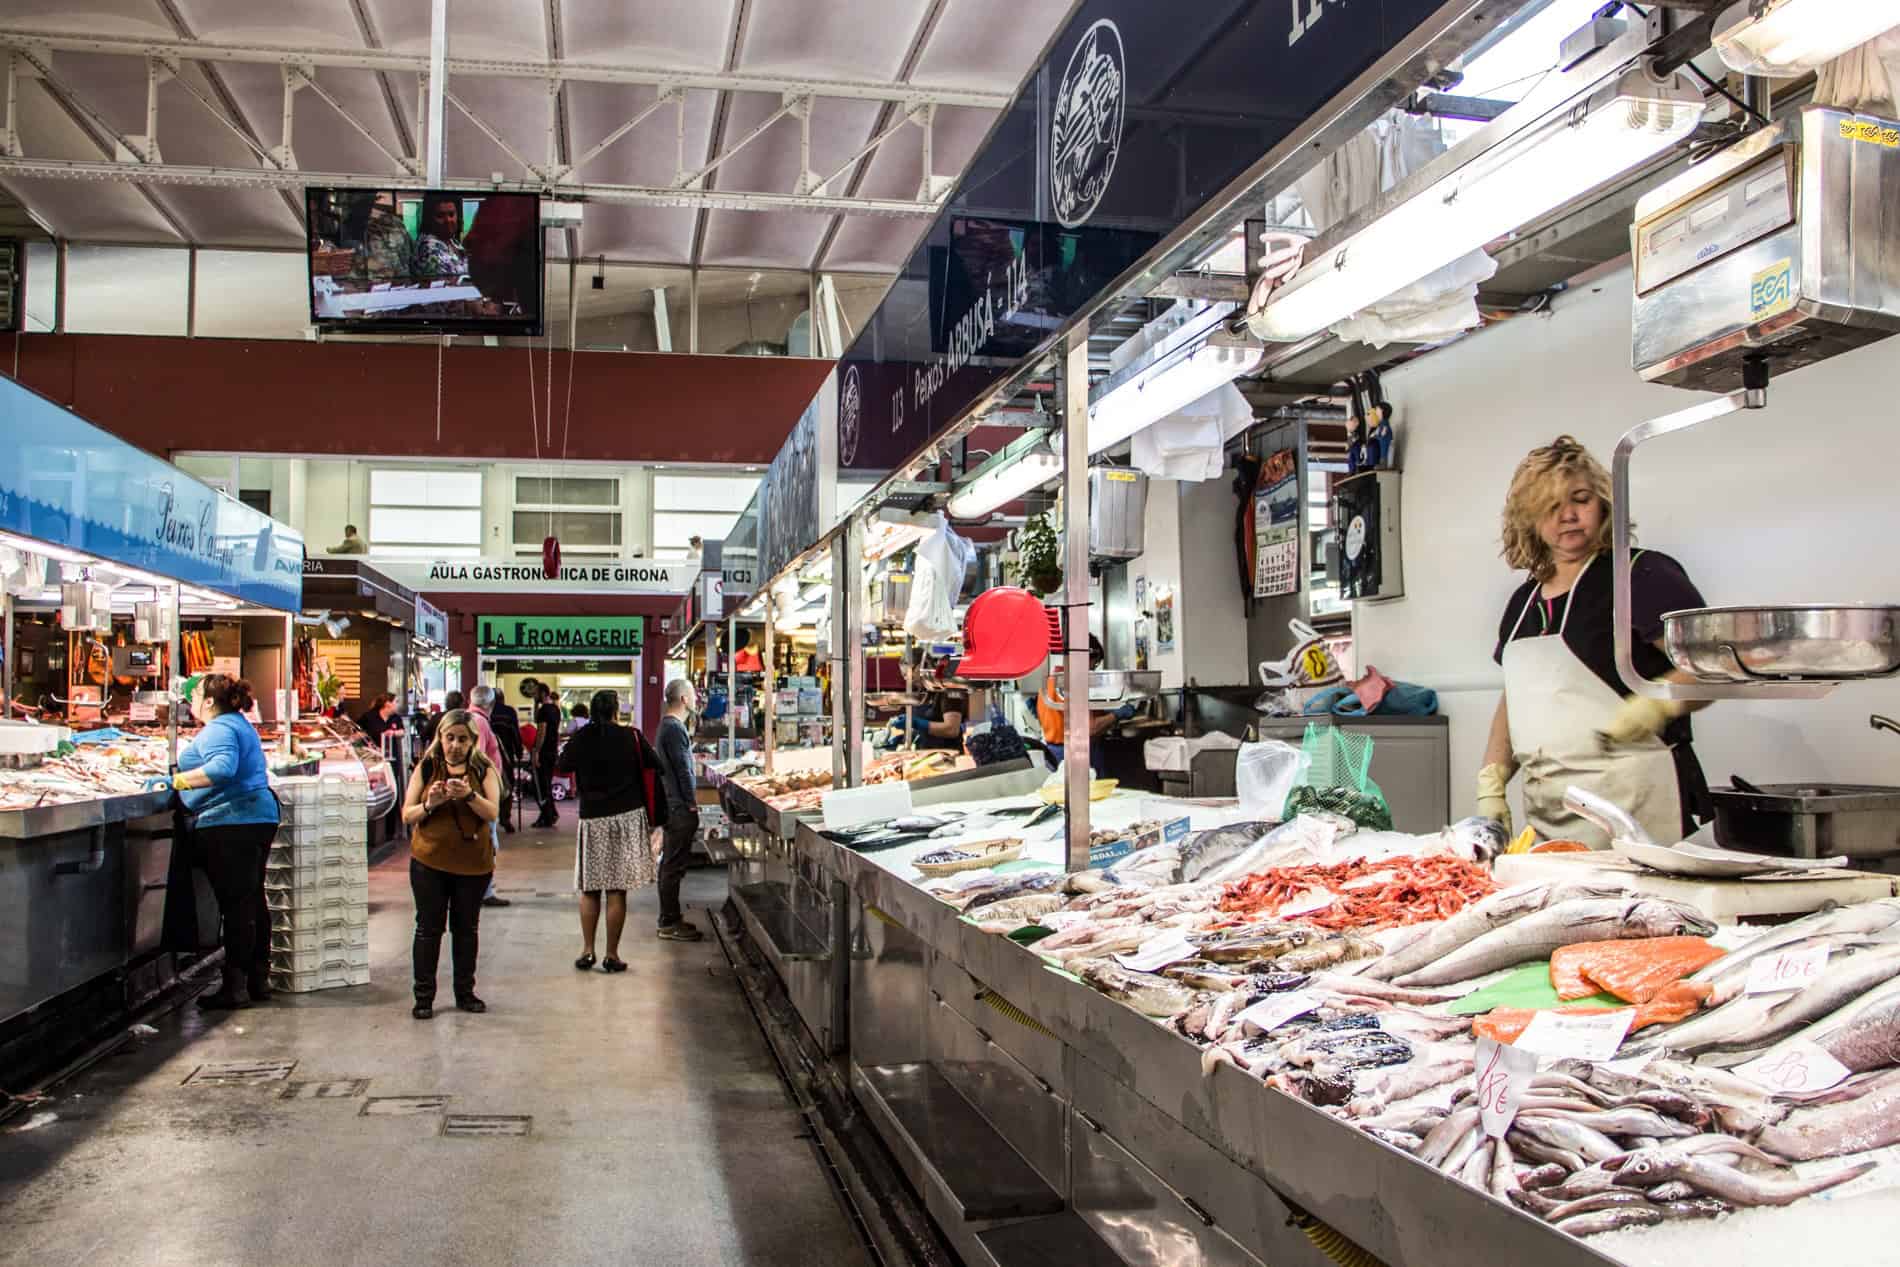 View of a fish stall stall at Girona’s indoor market. 